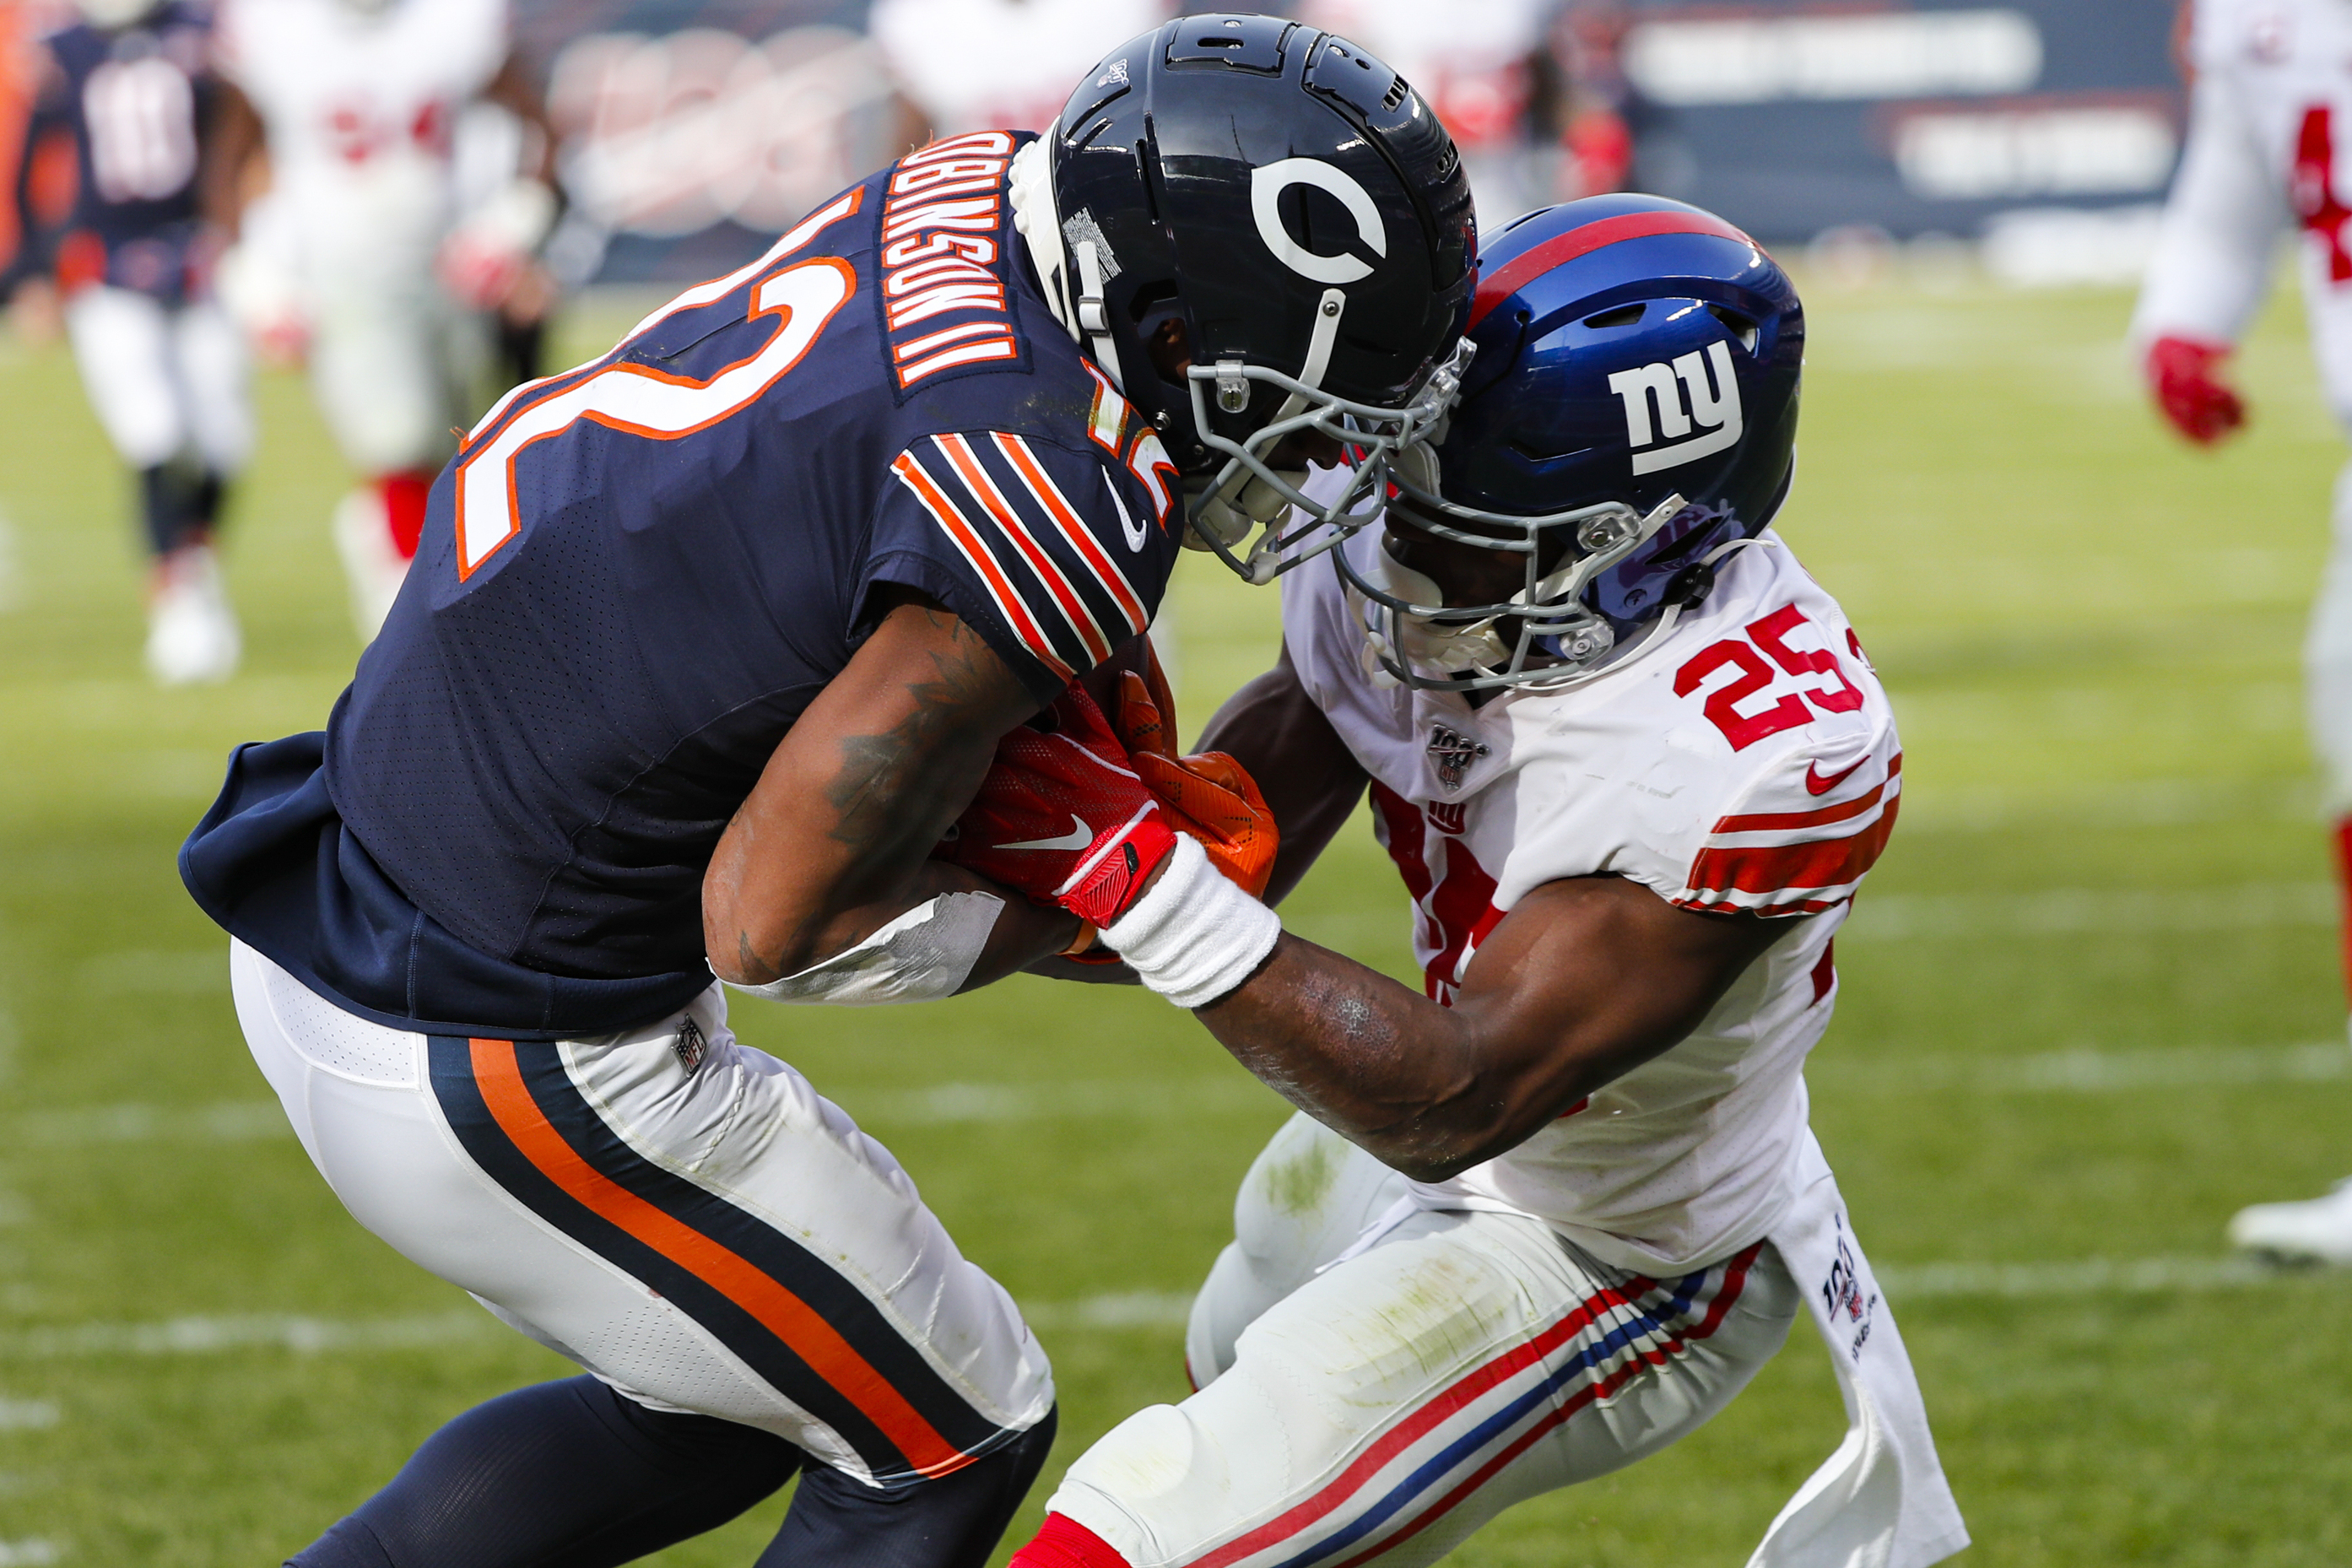 Giants’ secondary struggles in 19-14 loss to Bears